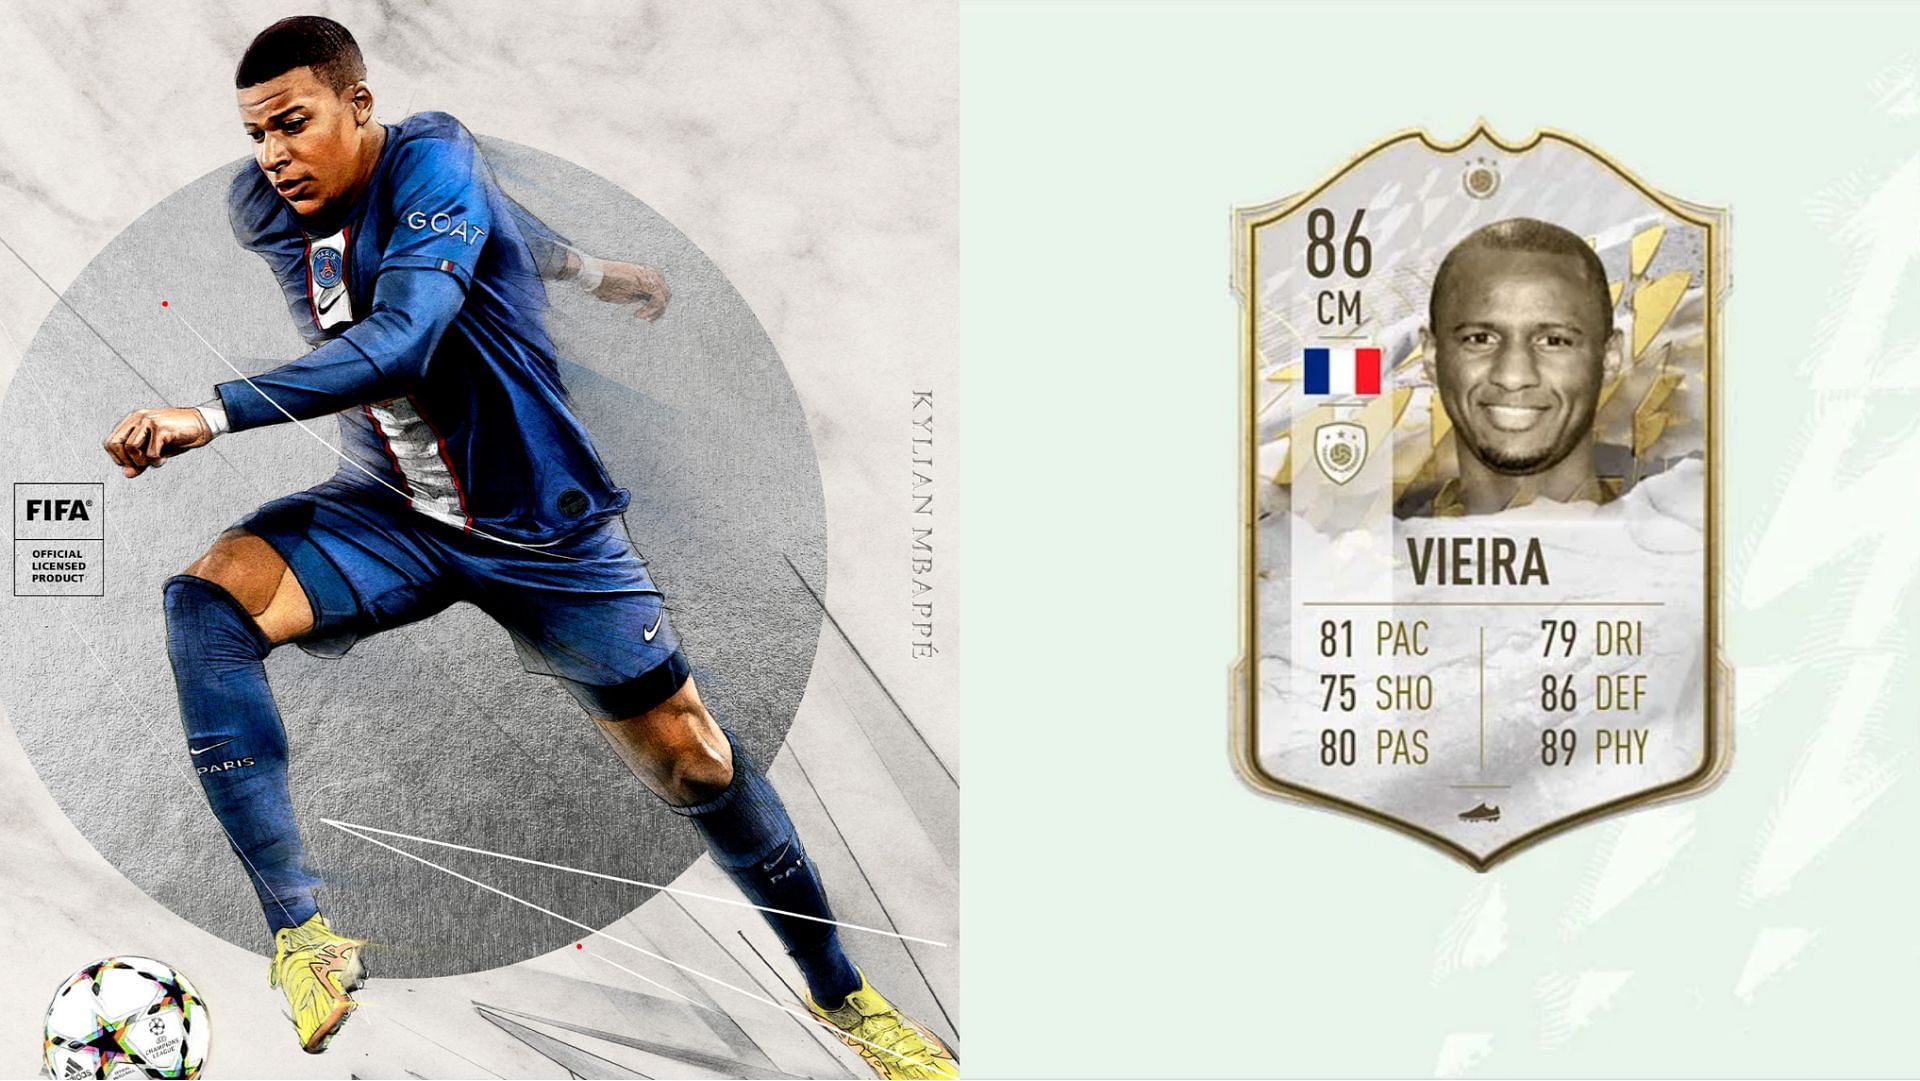 FIFA 23 World Cup Swaps guide offers Patrick Vieira as the main prize